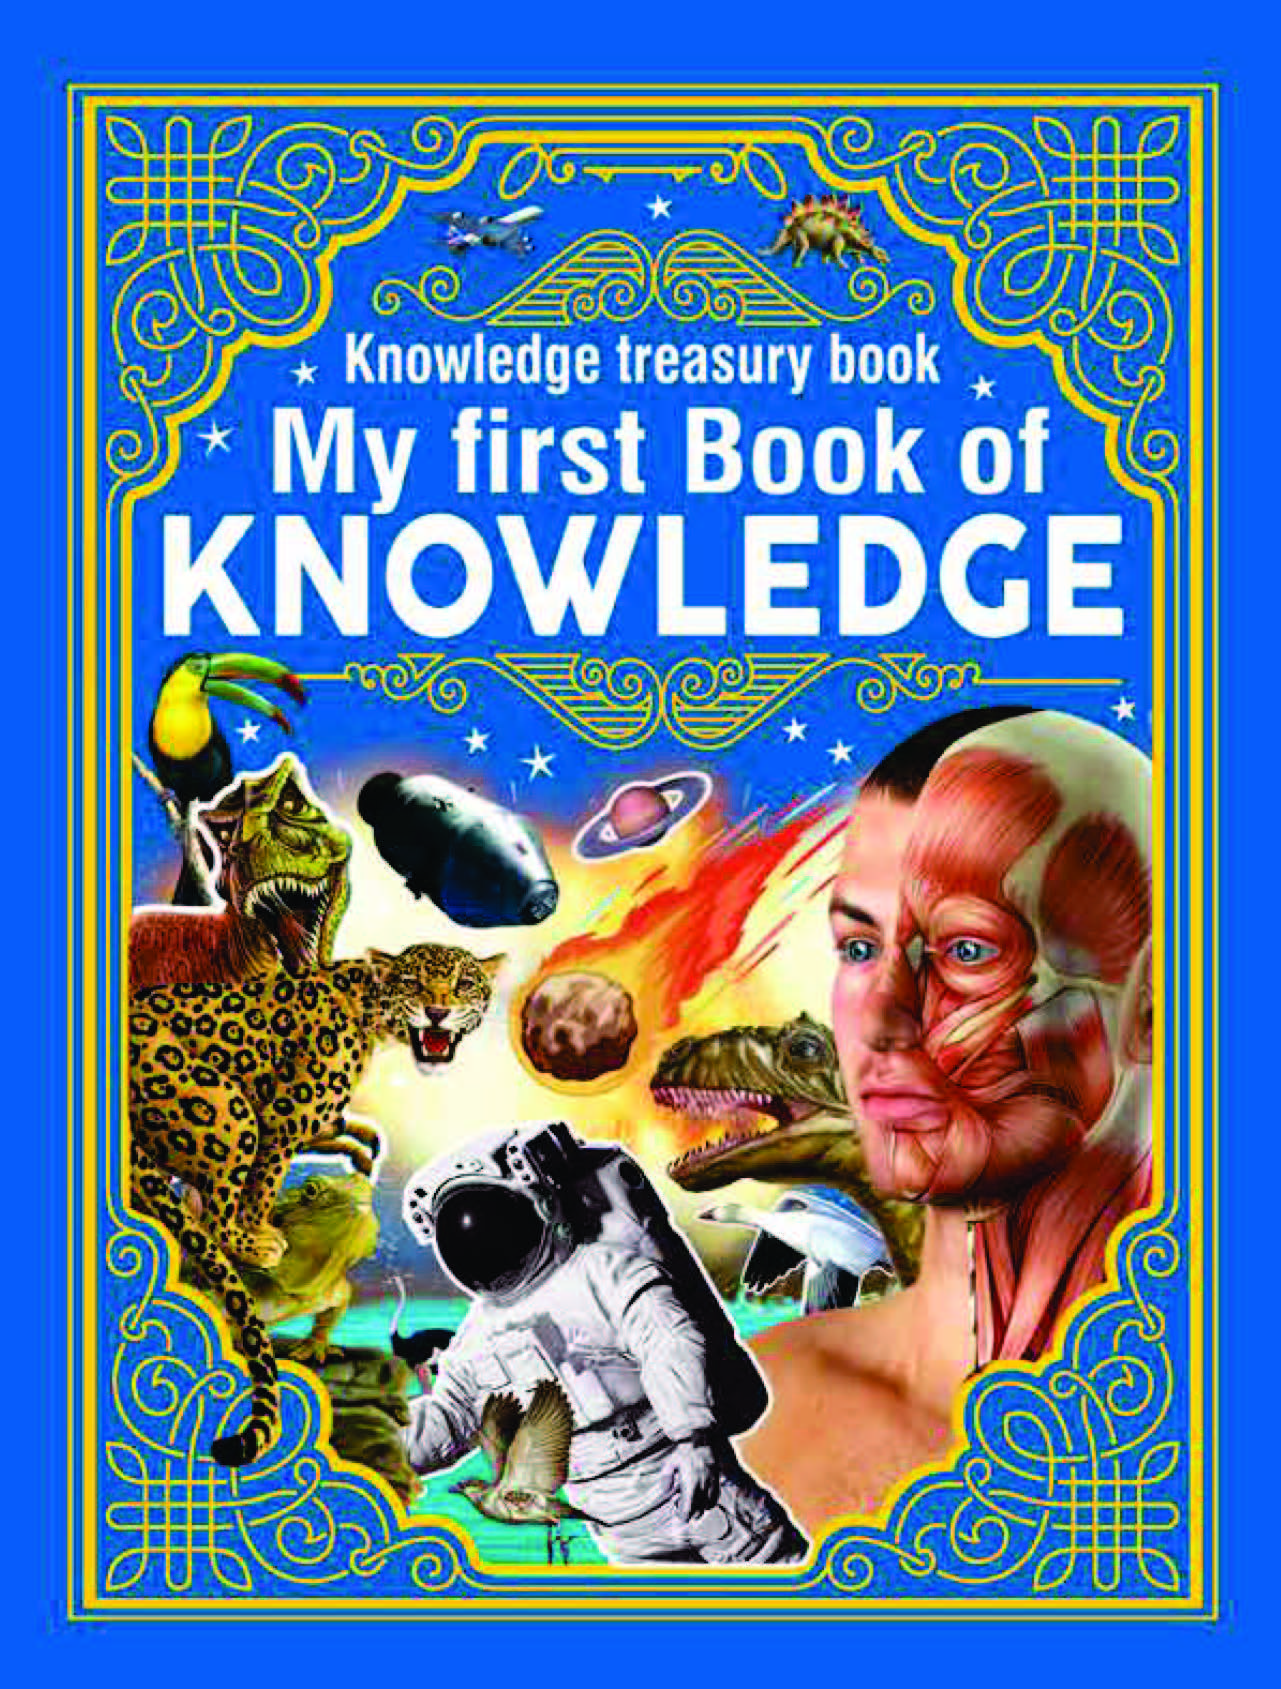 My first book of Knowledge